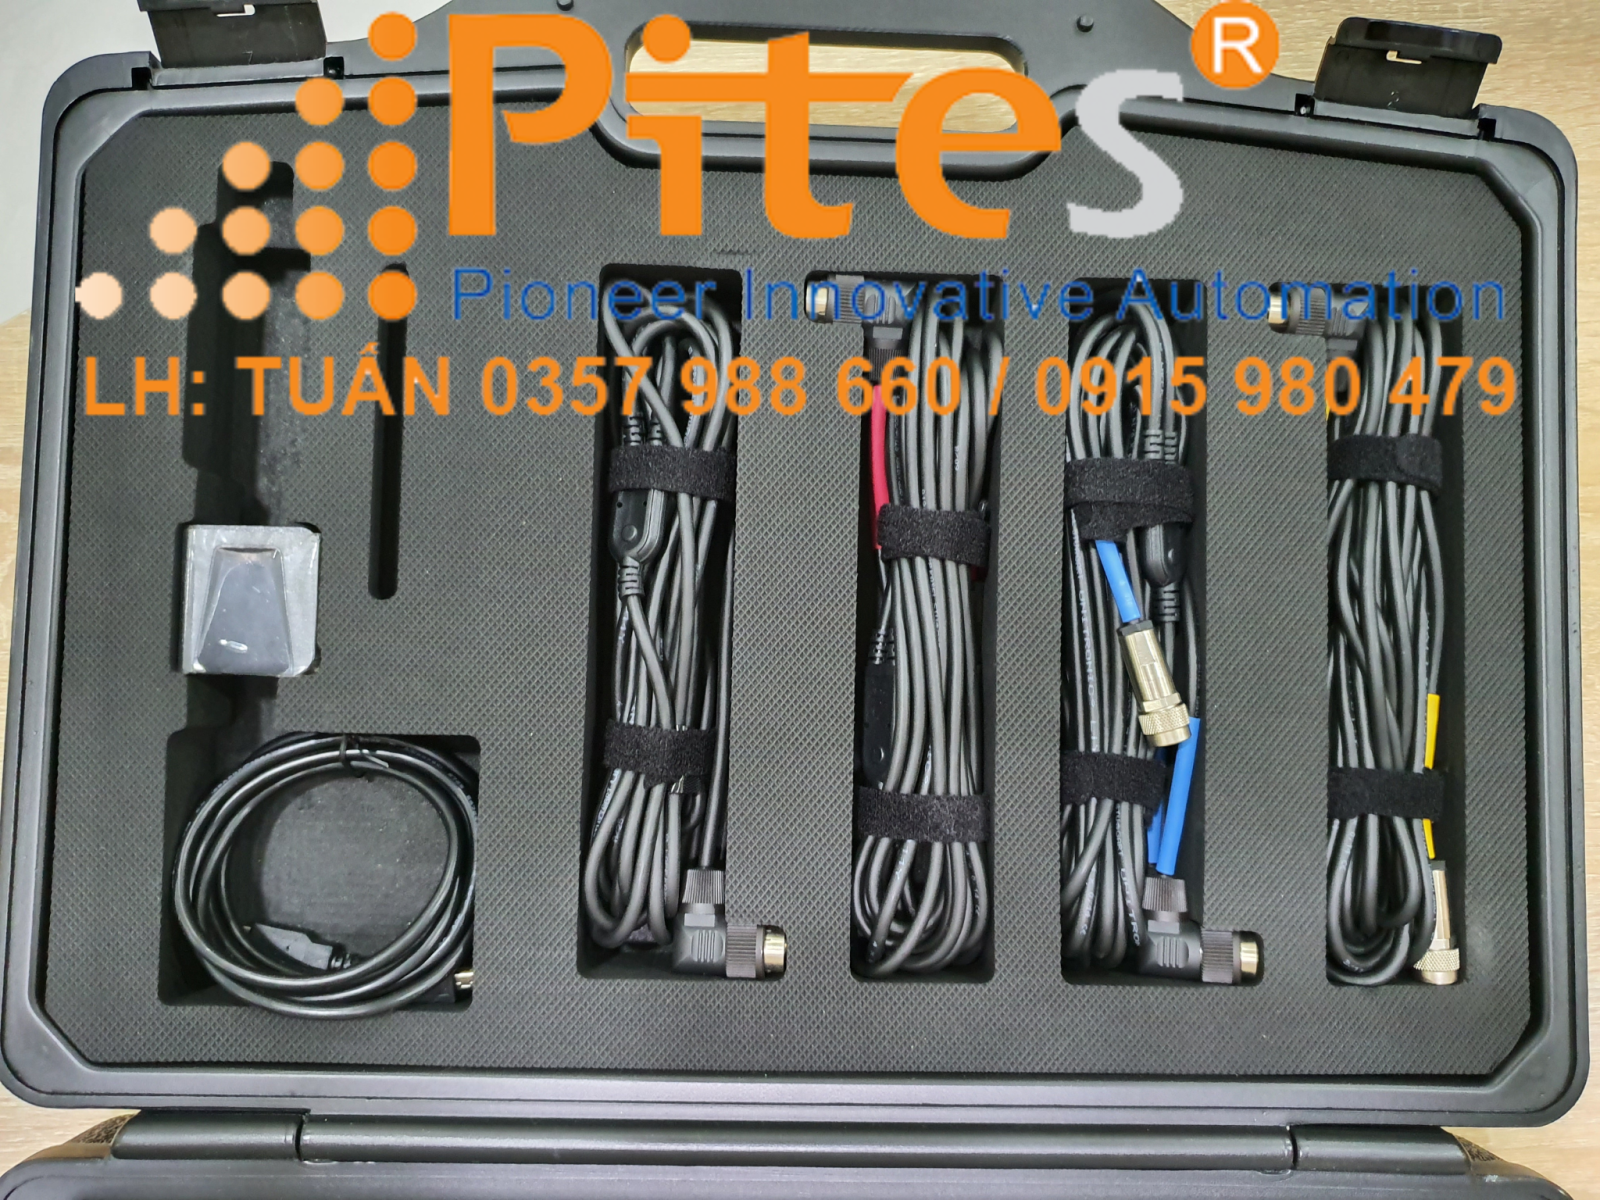 Y-connecting cable 5 meters, Sensormate Y-connecting cable 5 meters, Cáp kết nối của bộ đo lực Sensormate Y-connecting cable 5 meters